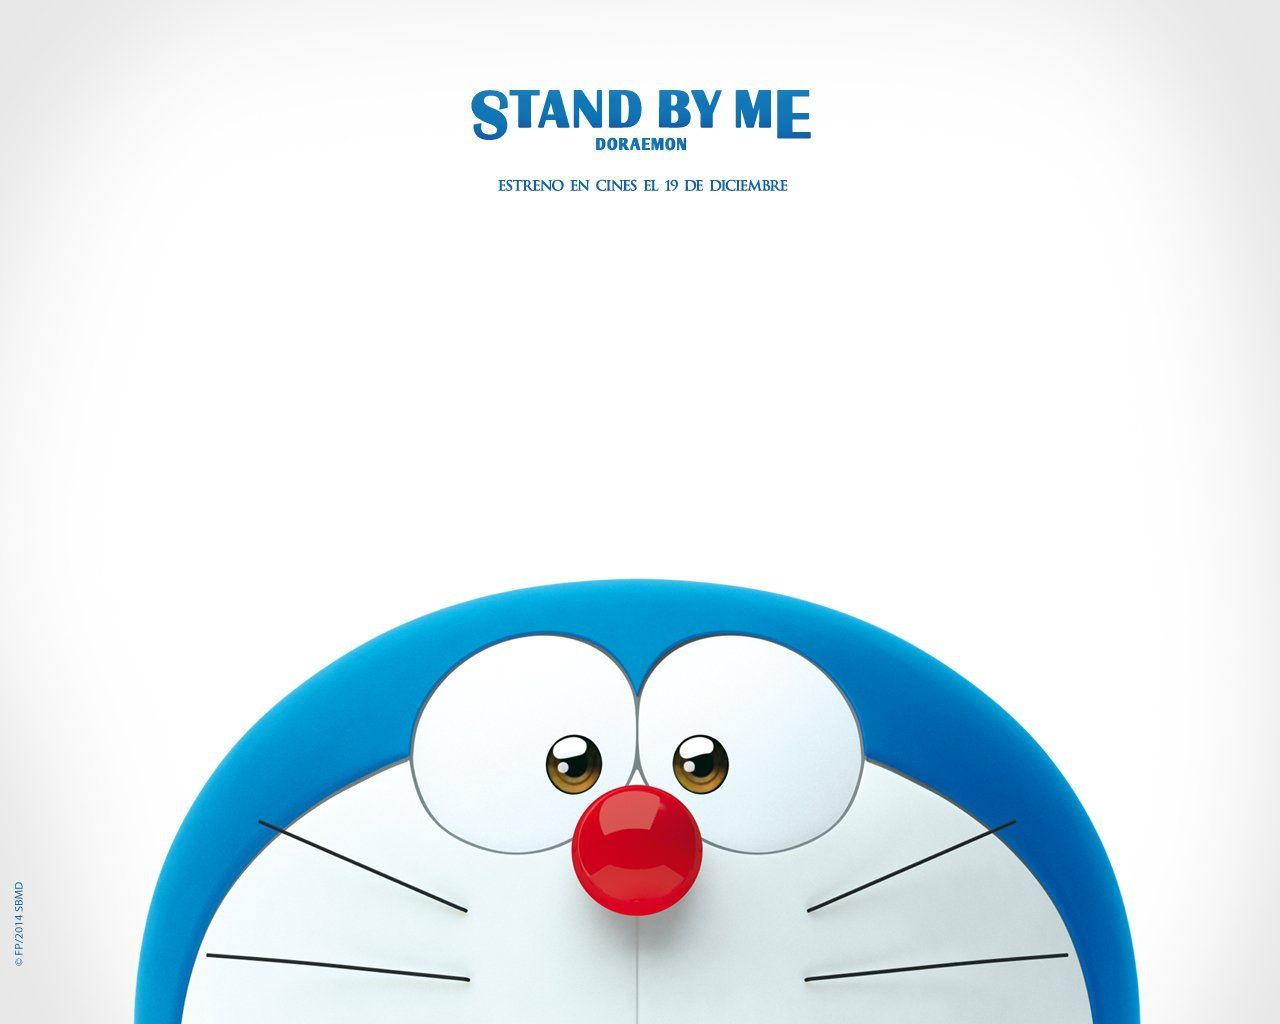 Doraemon - stand by me